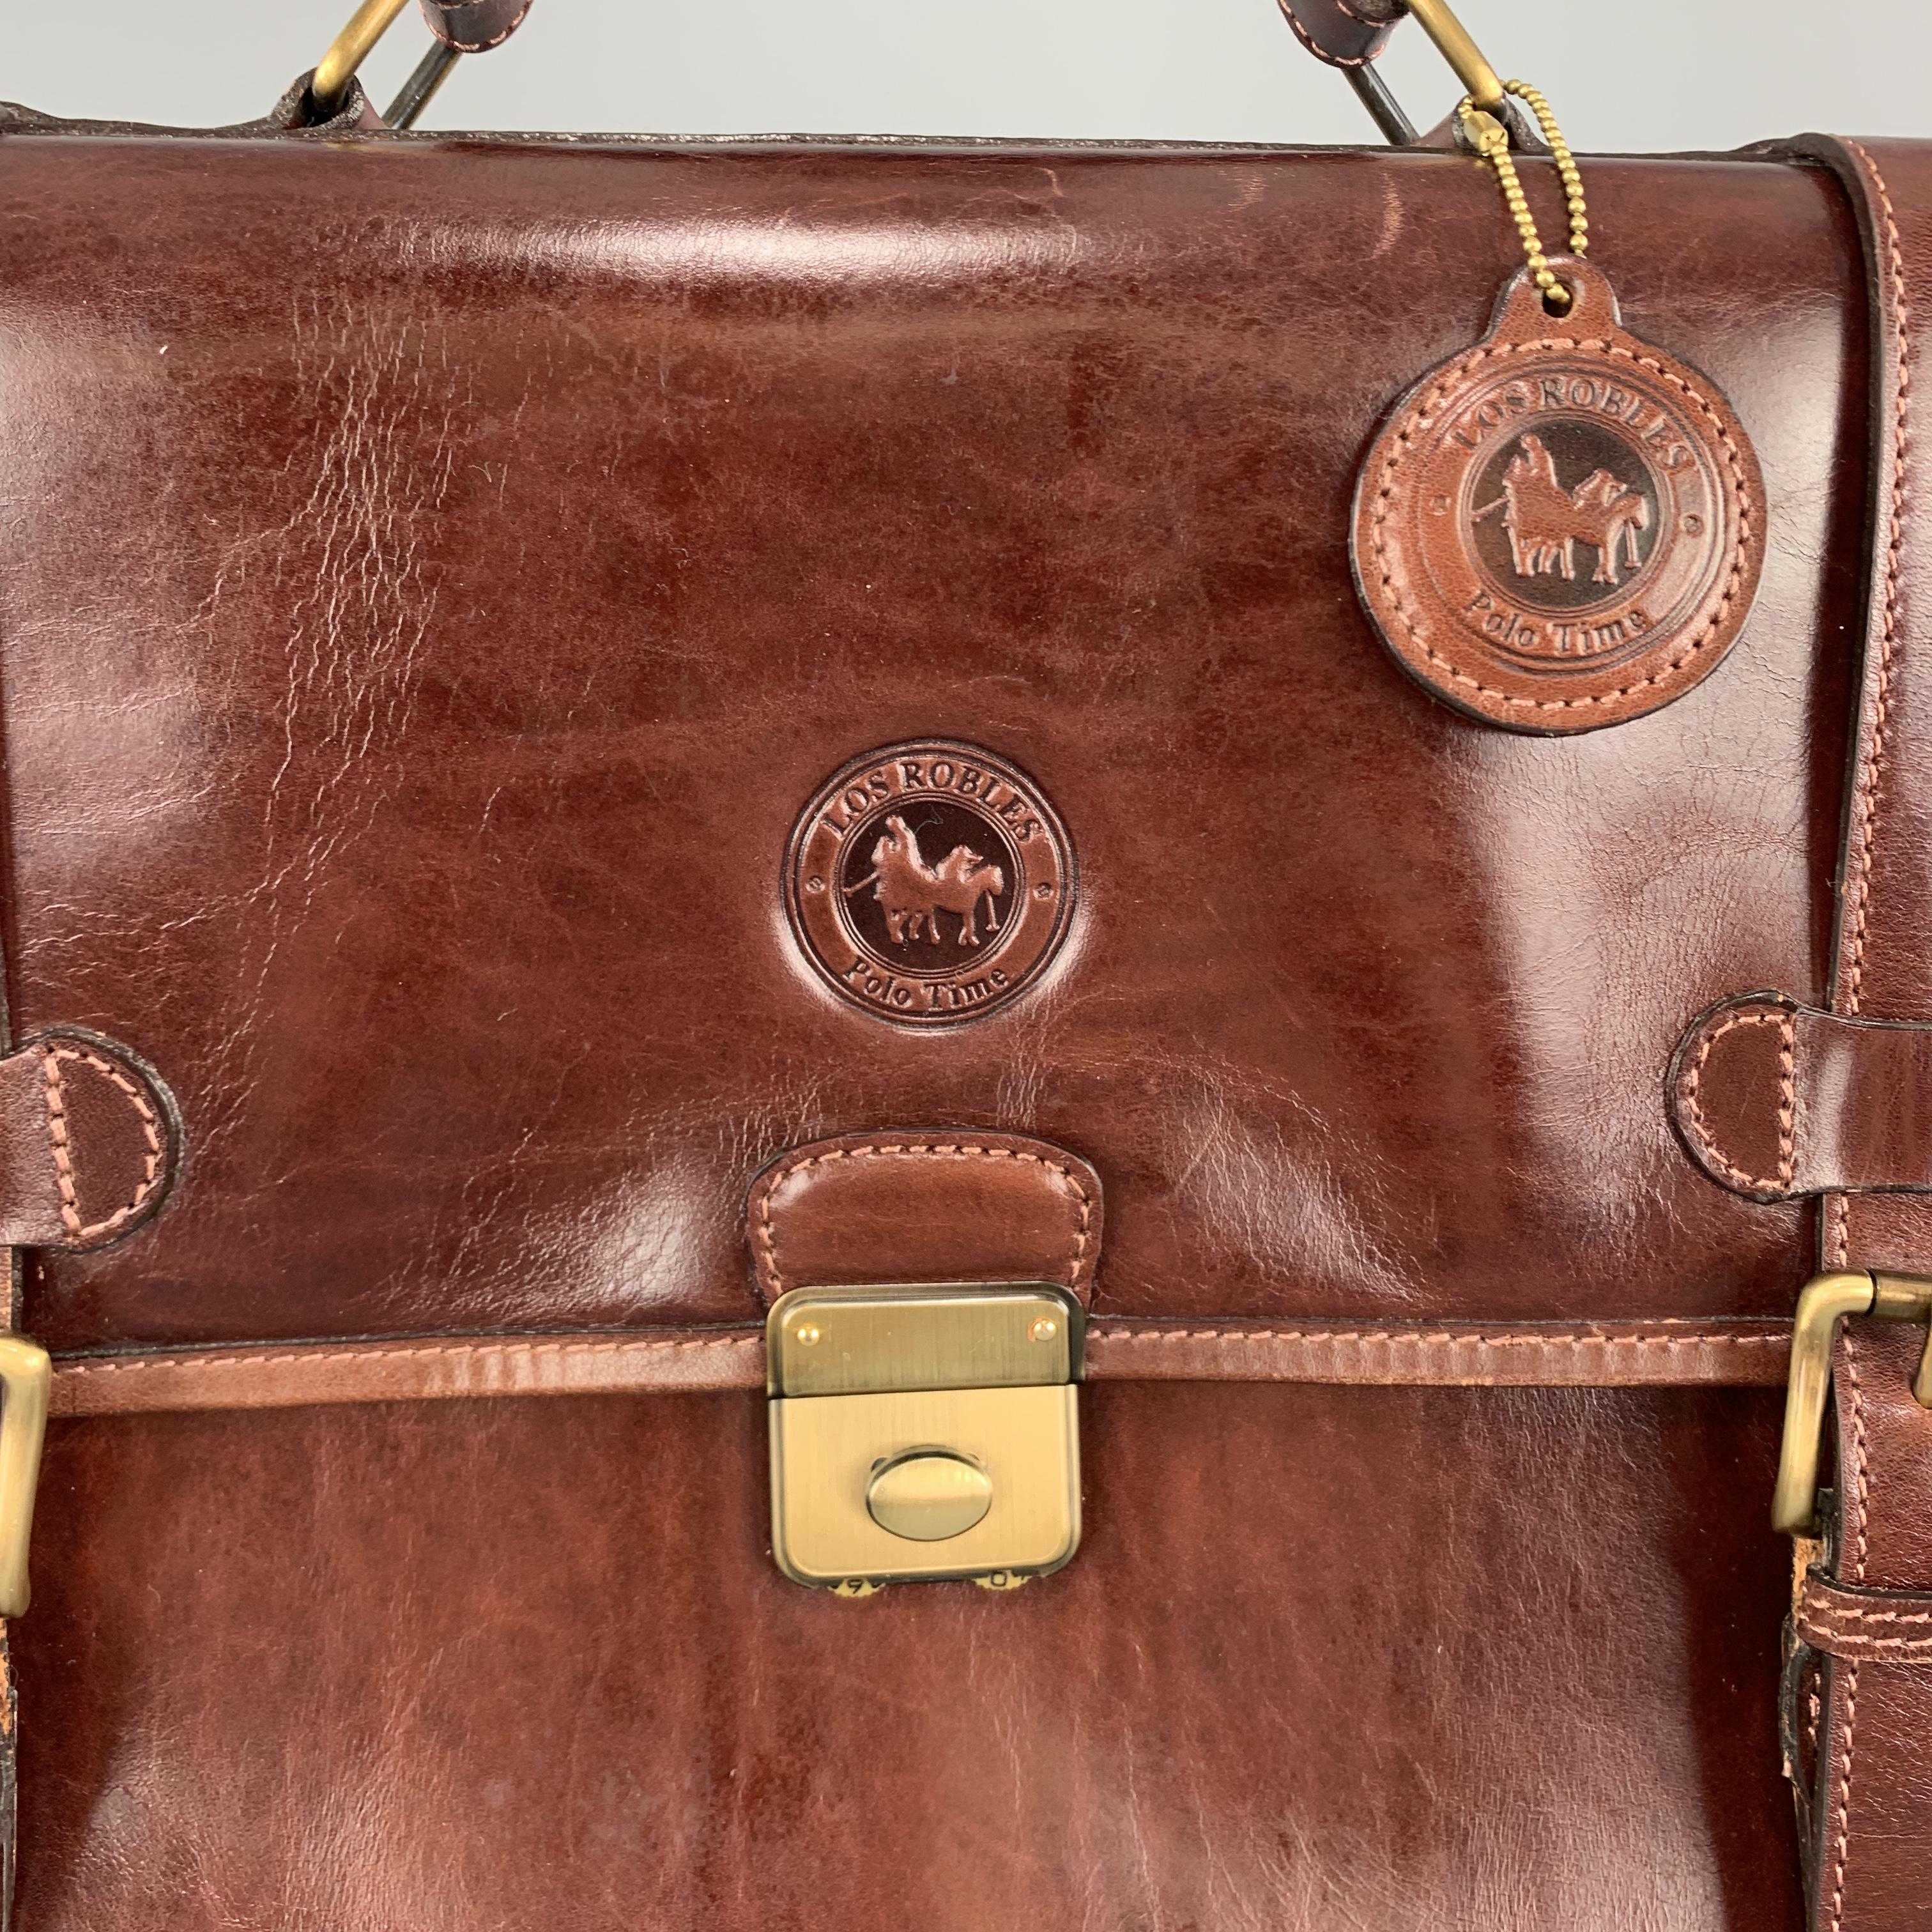 LOS ROBLES POLO TIME briefcase satchel comes in cognac leather with a rolled top handle, flap, double buckle and lock closure, detachable strap, and double compartment interior with storage pockets. Wear throughout. 

Good Pre-Owned